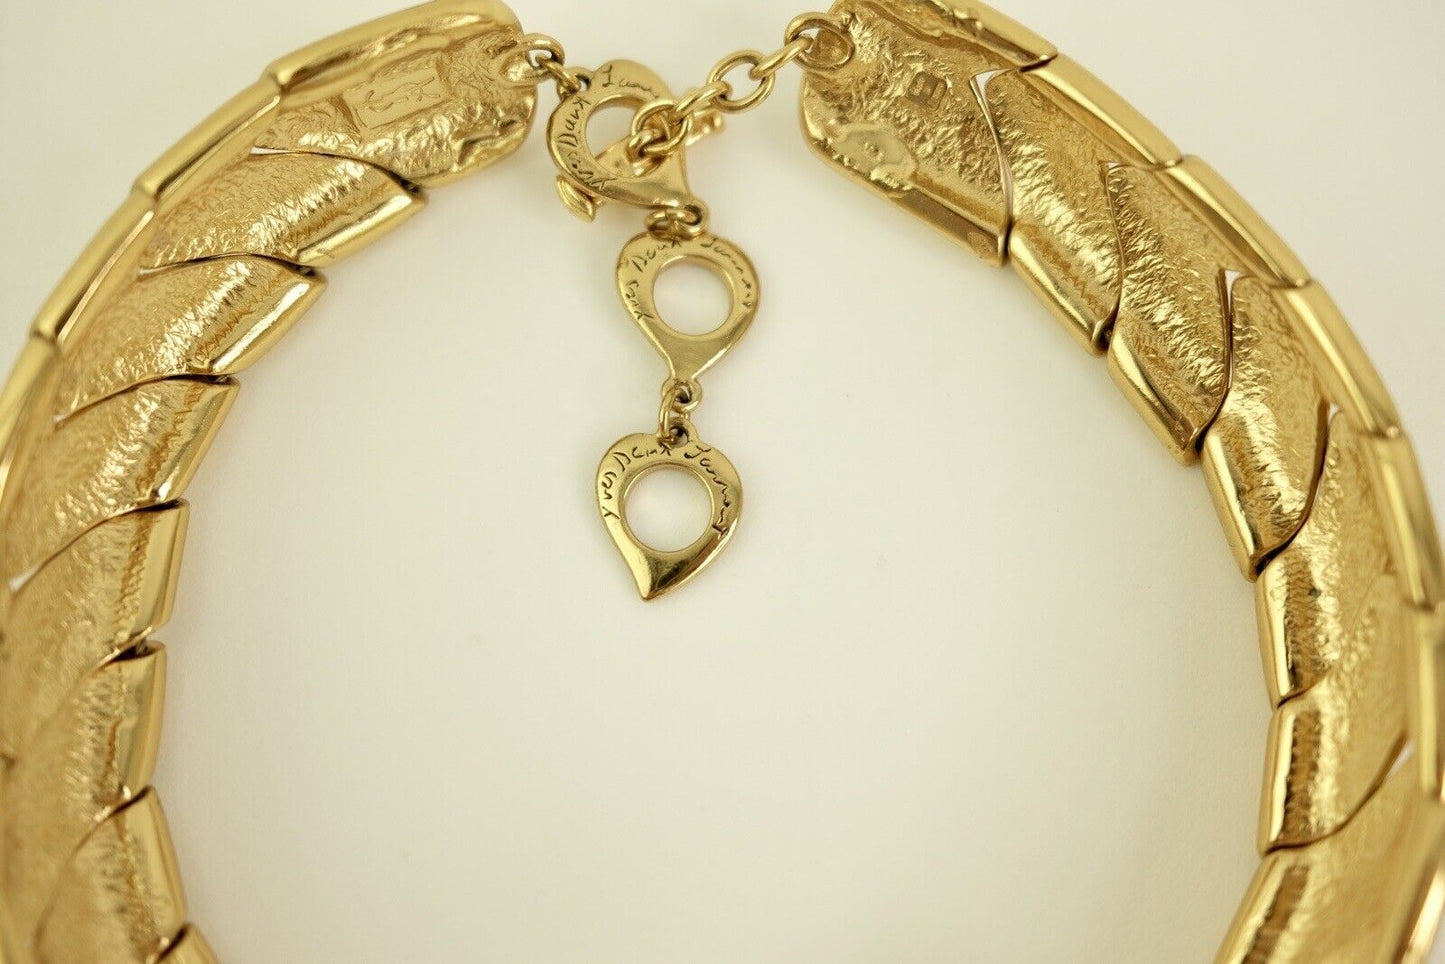 Vintage YSL Yves Saint Laurent Necklace, Choker Gold Vintage, Toggle Charm Choker Gold Filled Necklace Made in France Gift for mom, unisex